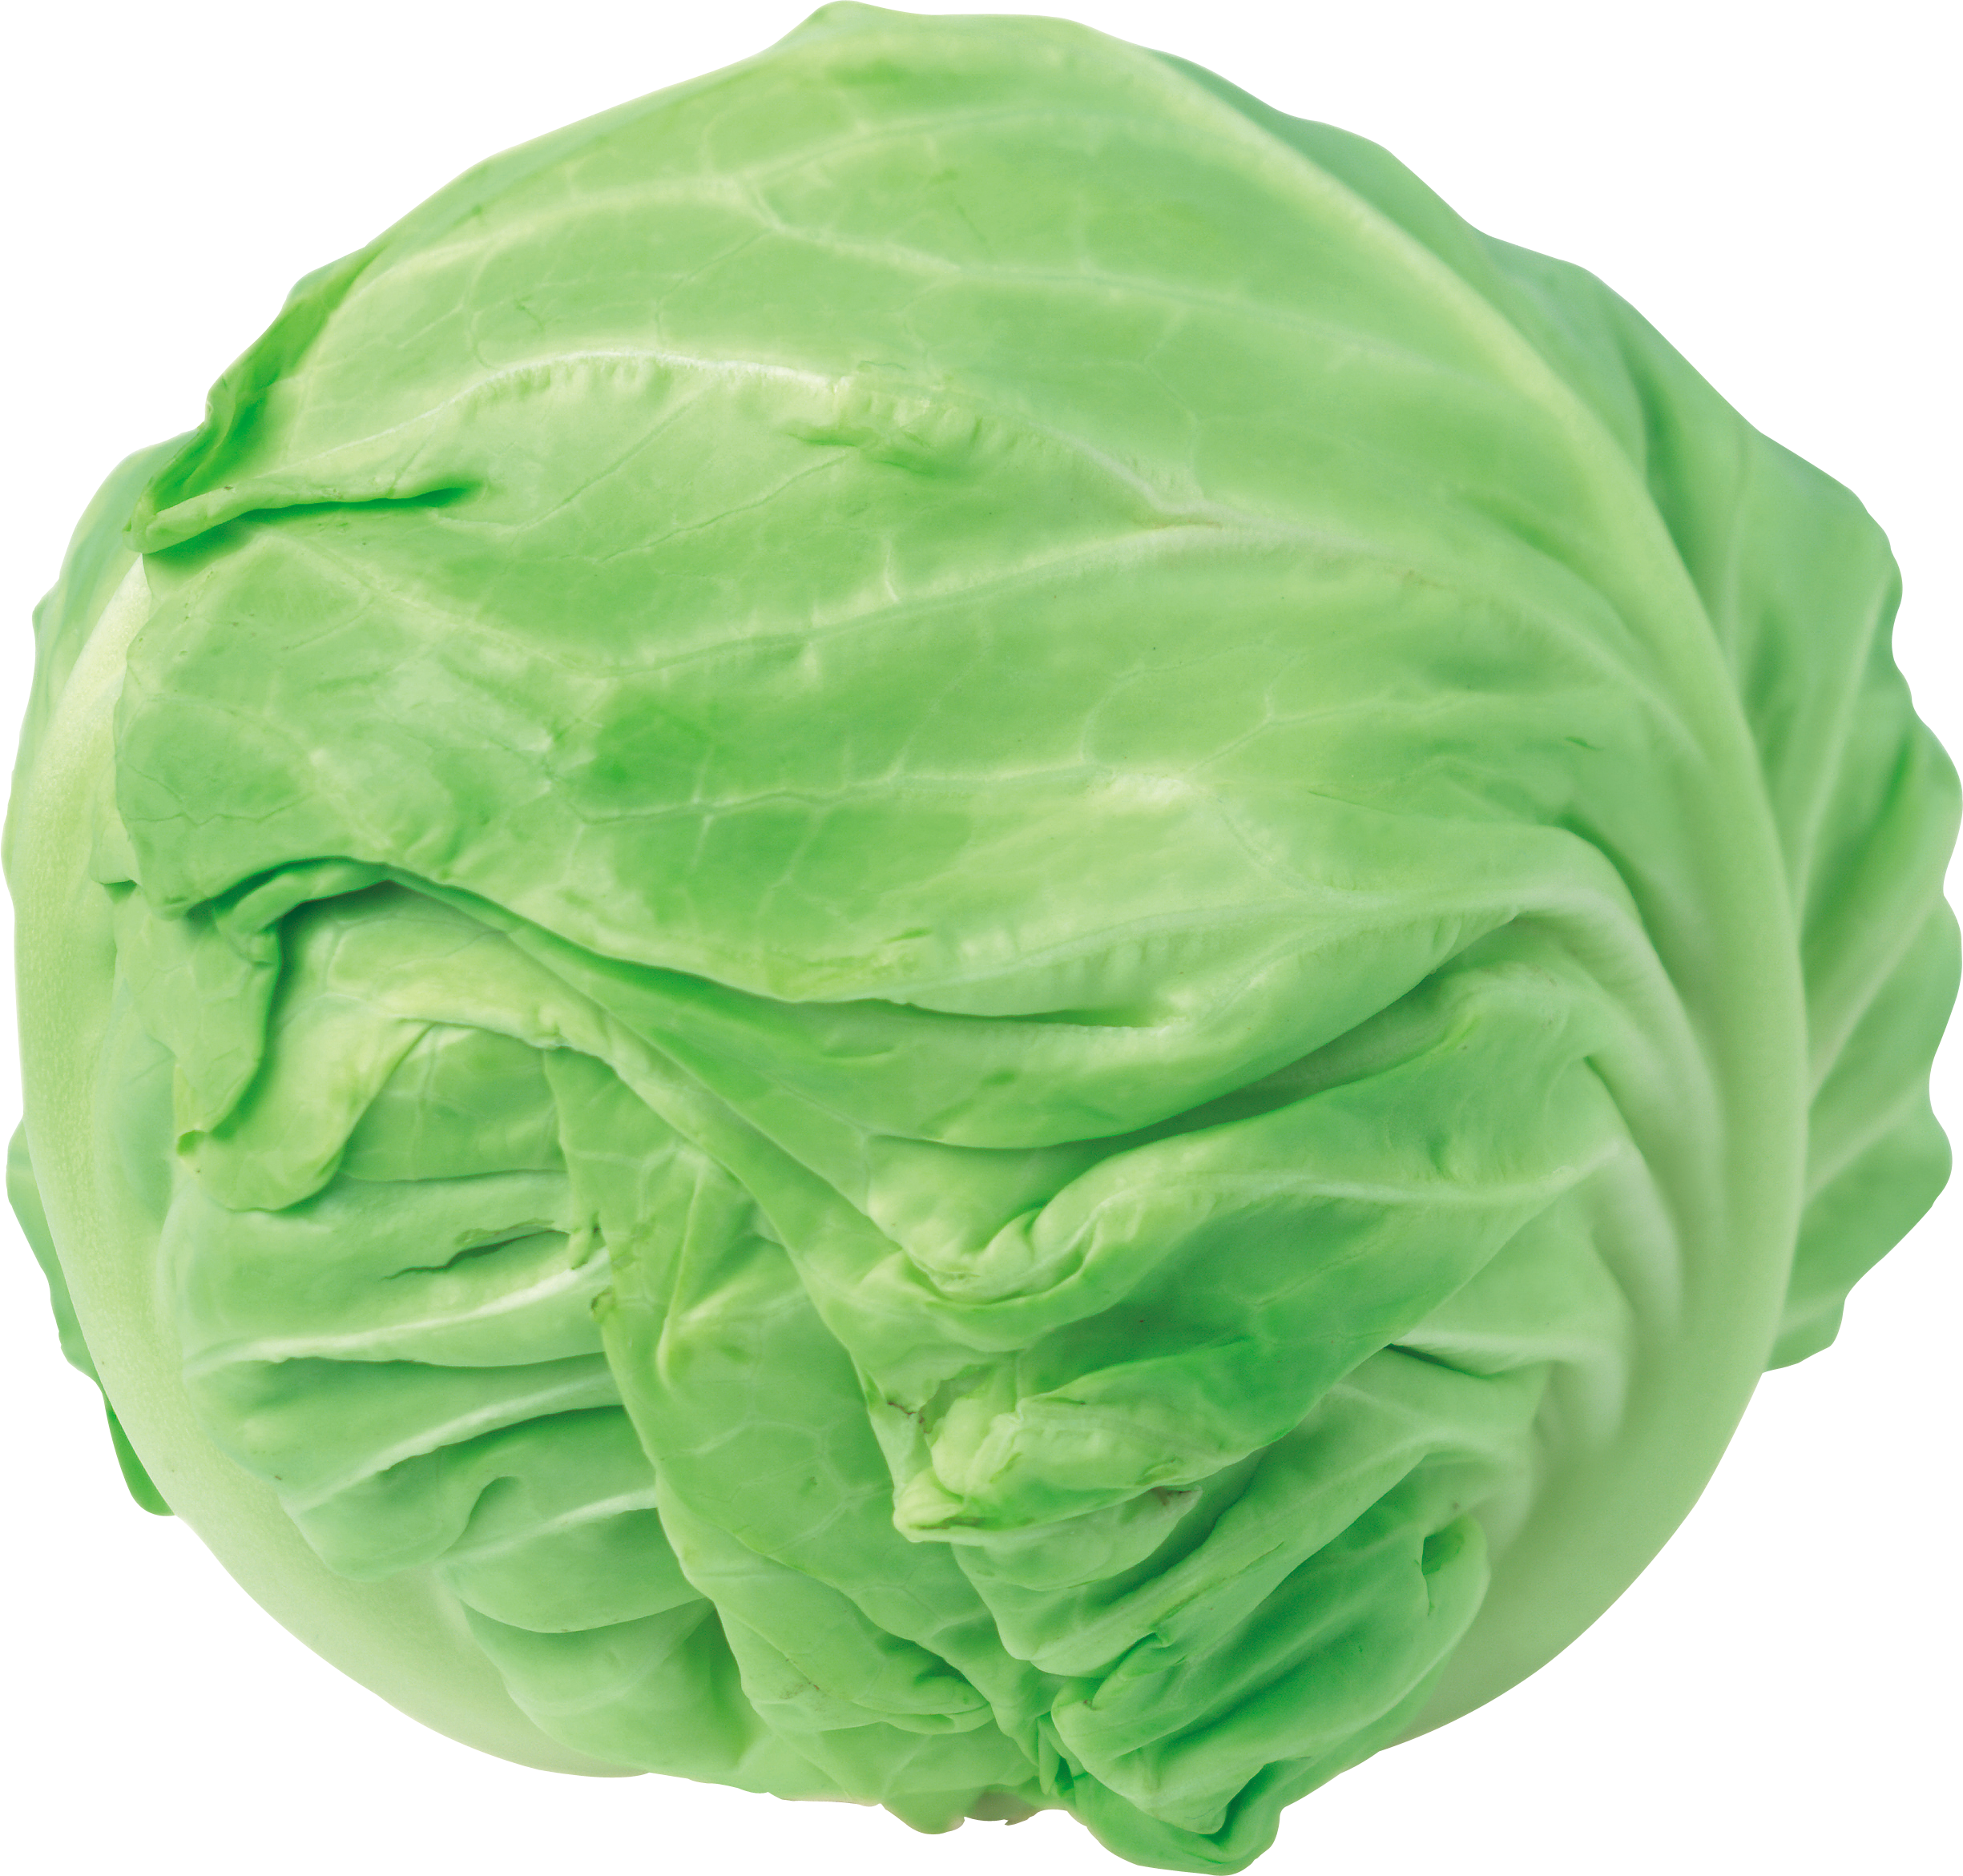 A Head Of Cabbage On A Black Background